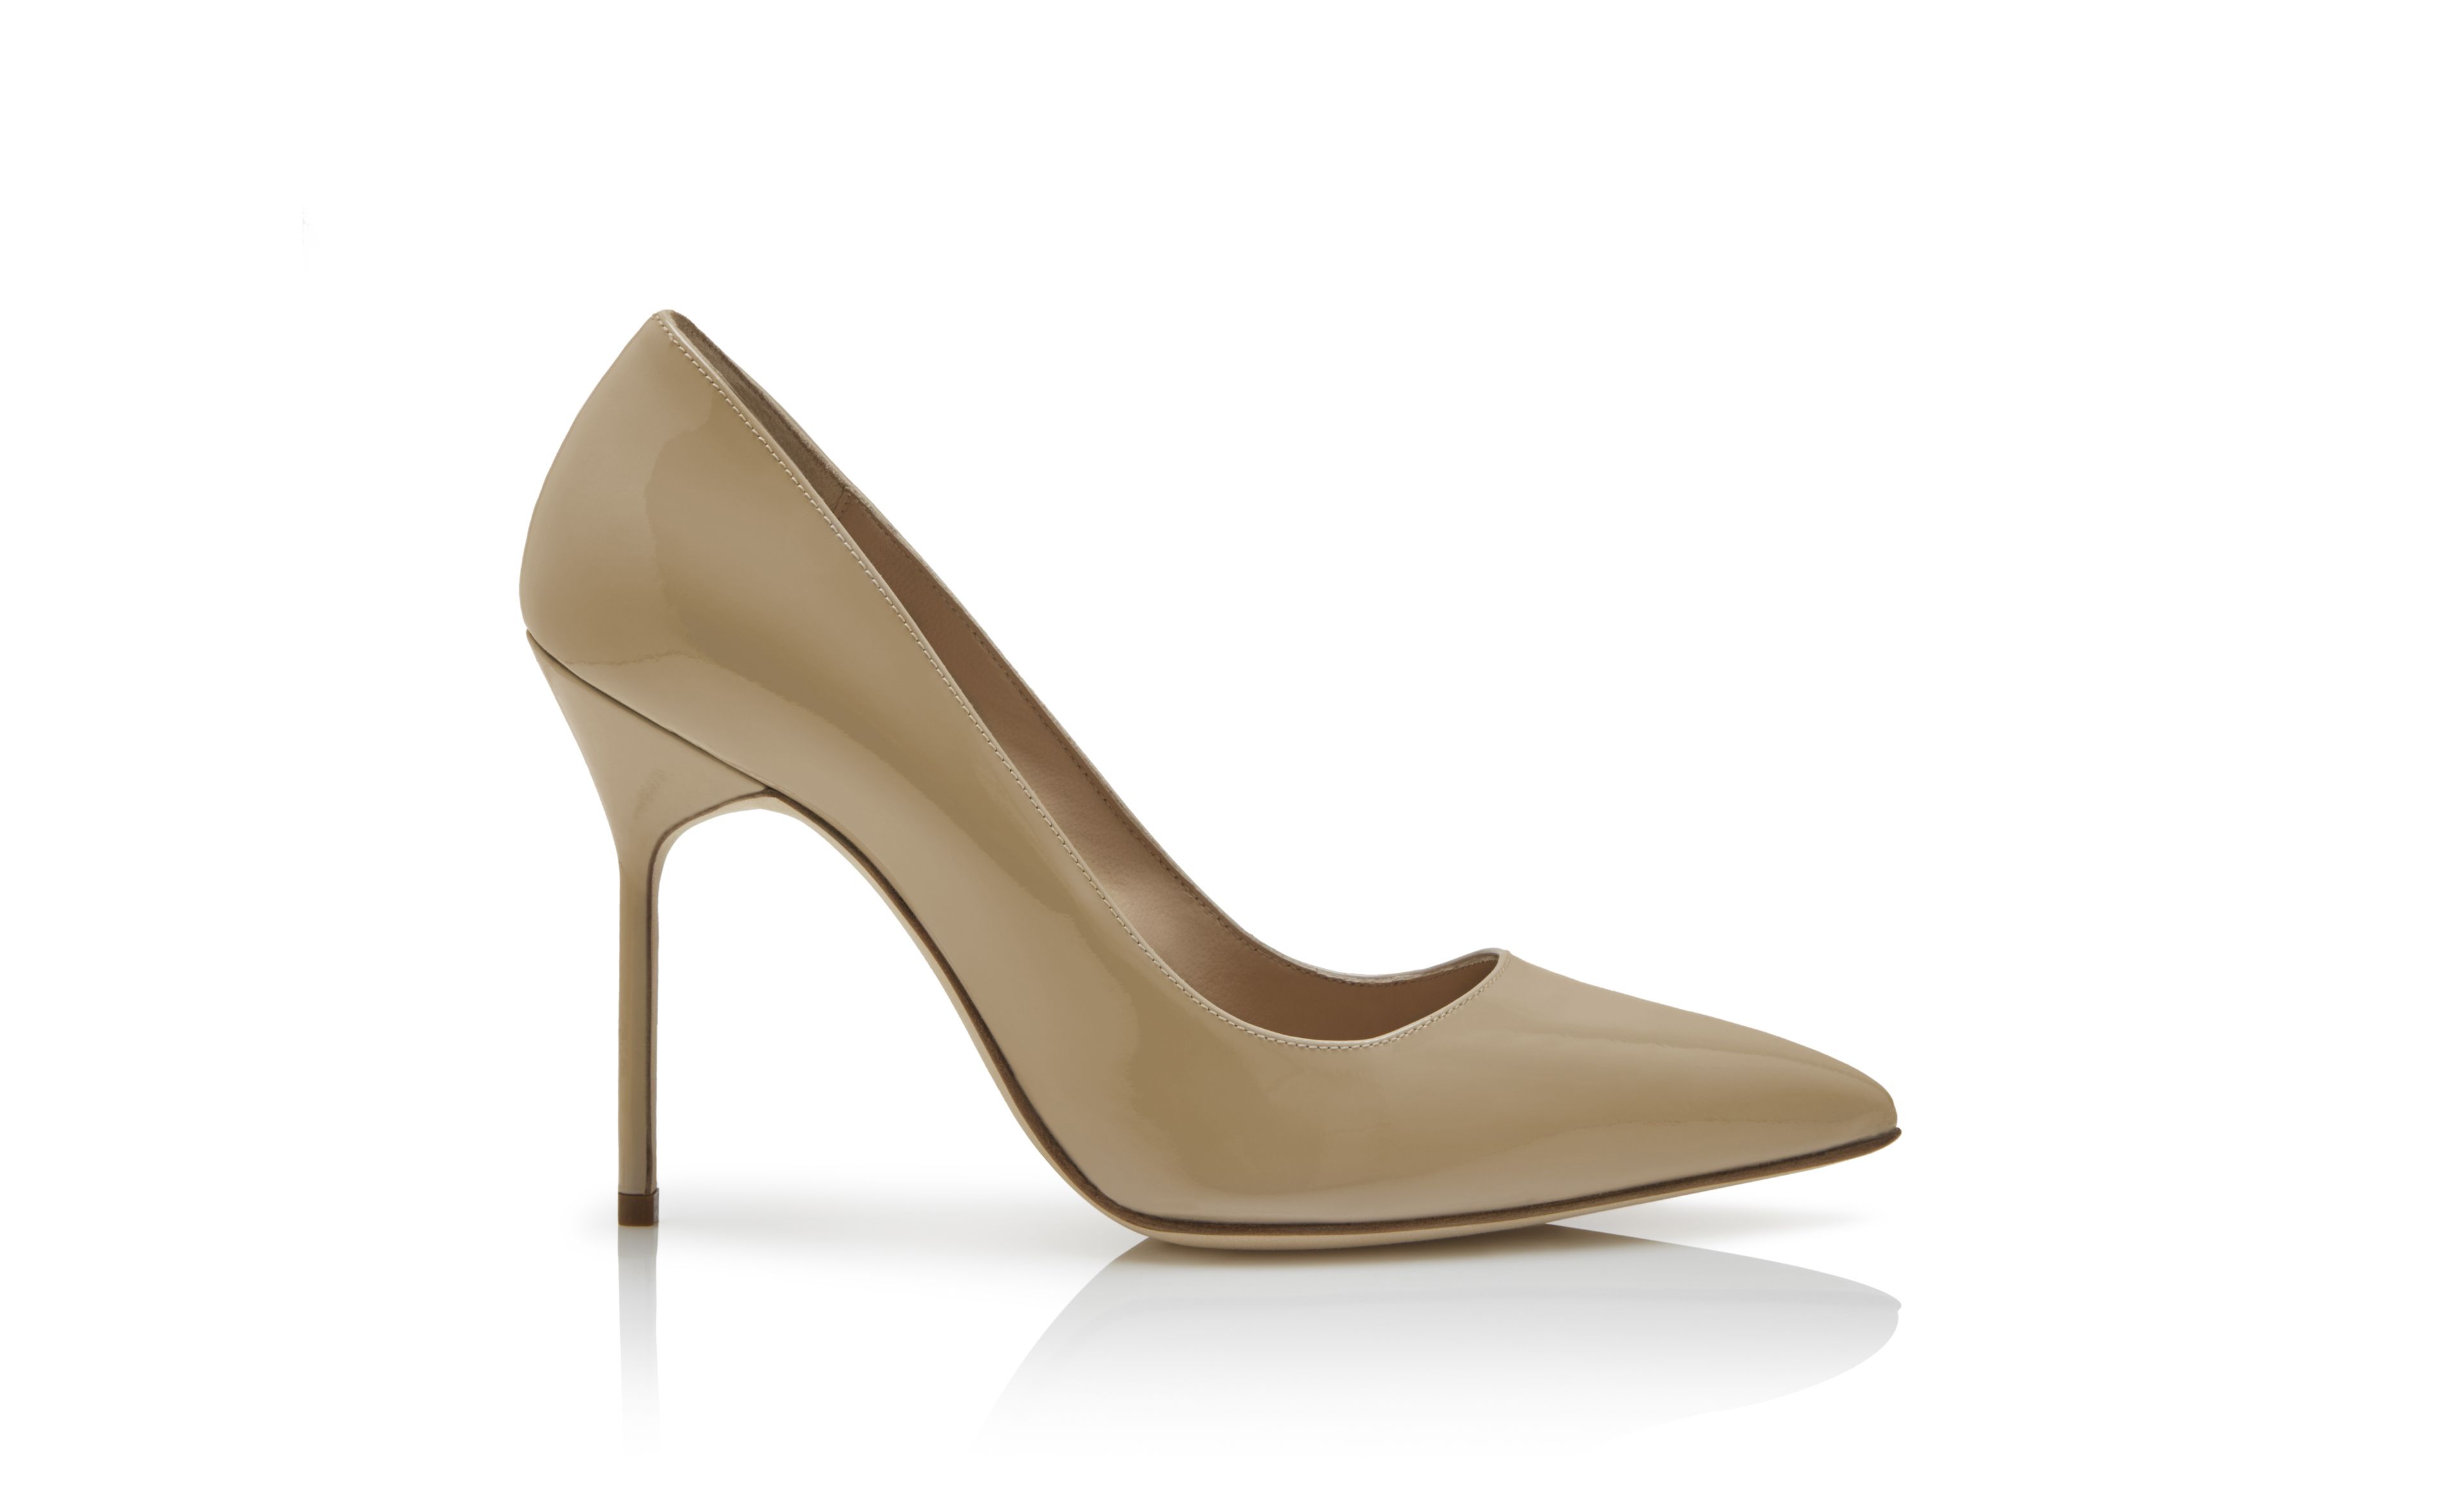 Designer Beige Patent Leather Pointed Toe Pumps - Image thumbnail